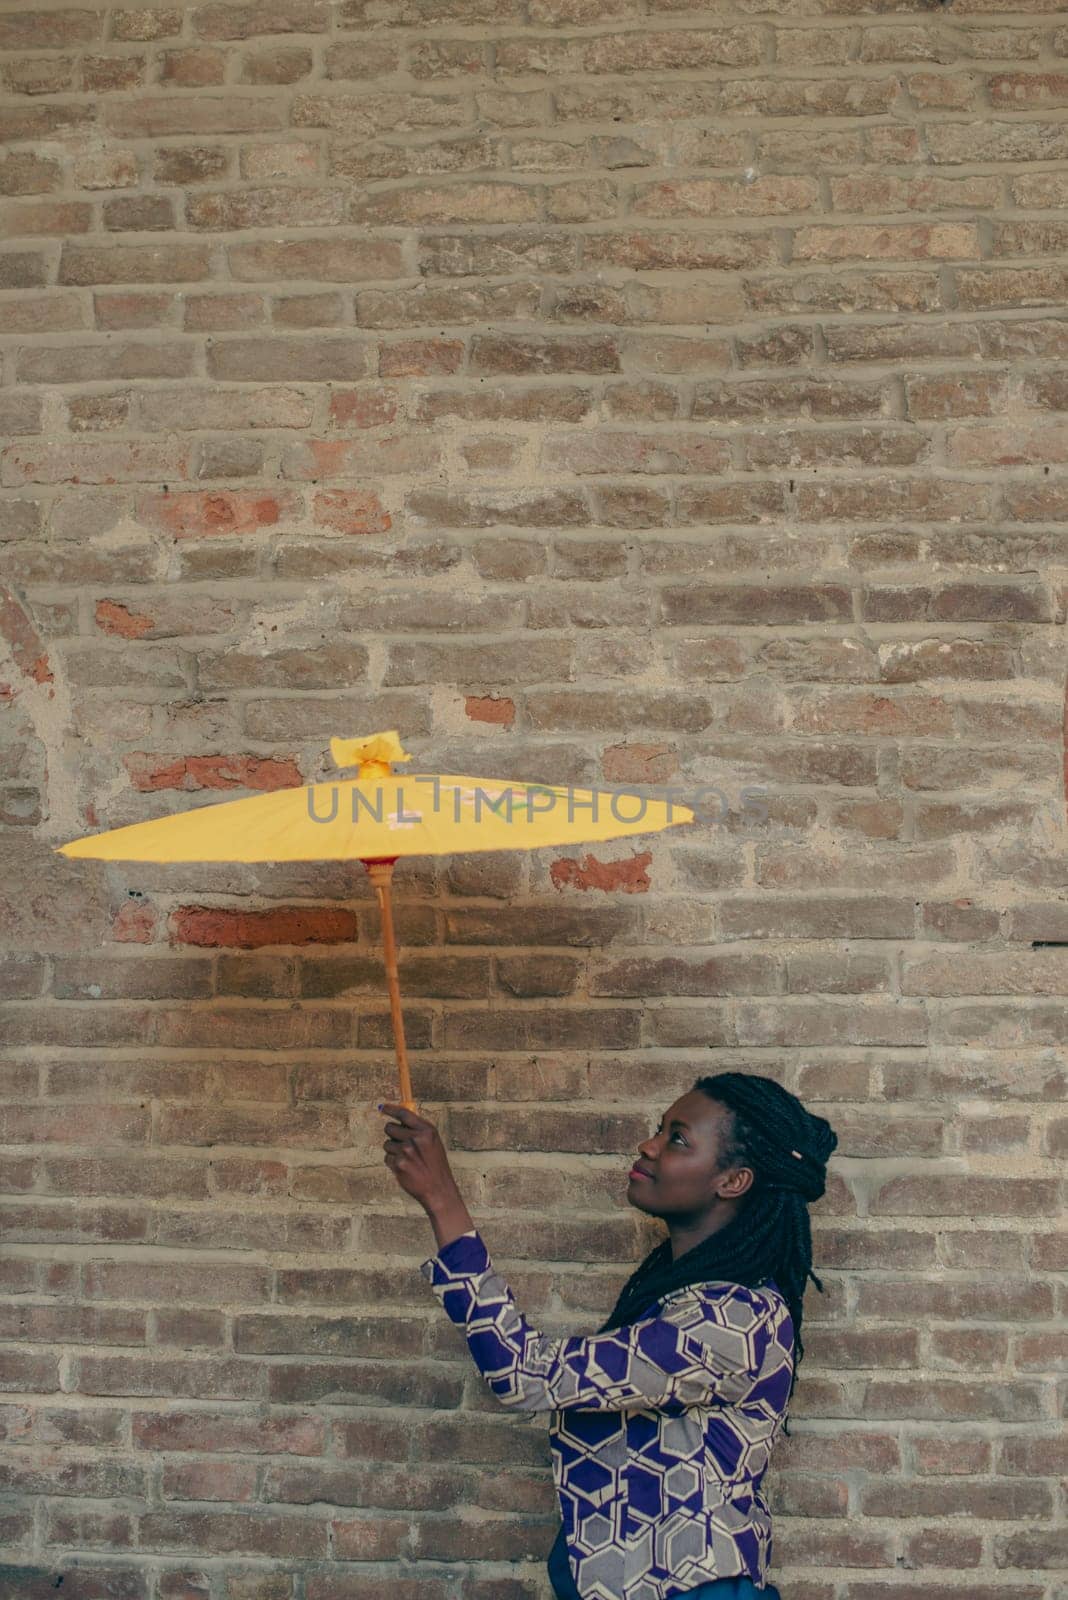 Young woman with dreadlocks braided hairstyle holding umbrella parasol. Happy young woman feeling confident in her style. Fashionable woman standing in the street of old village against stone wall.